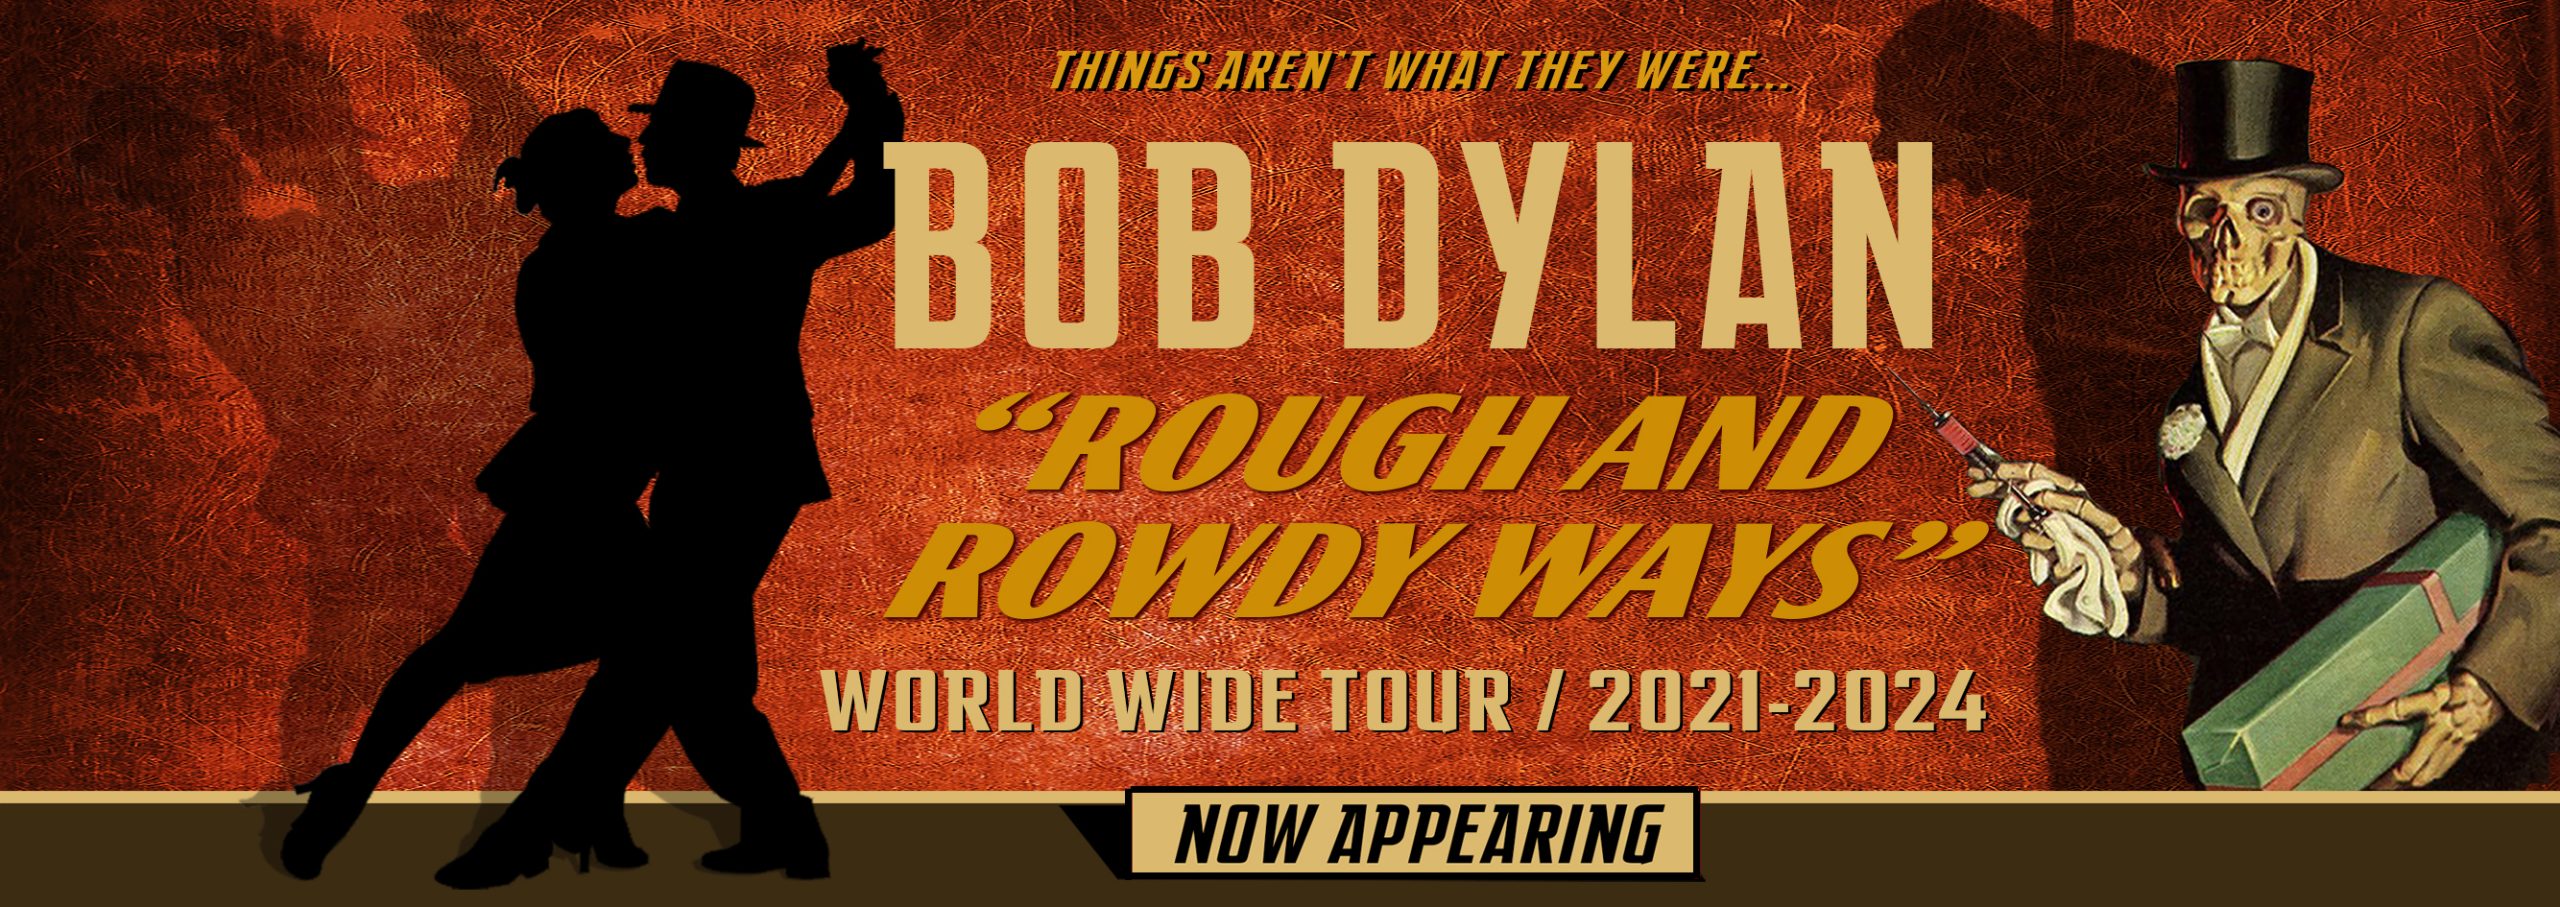 On Tour The Official Bob Dylan Site